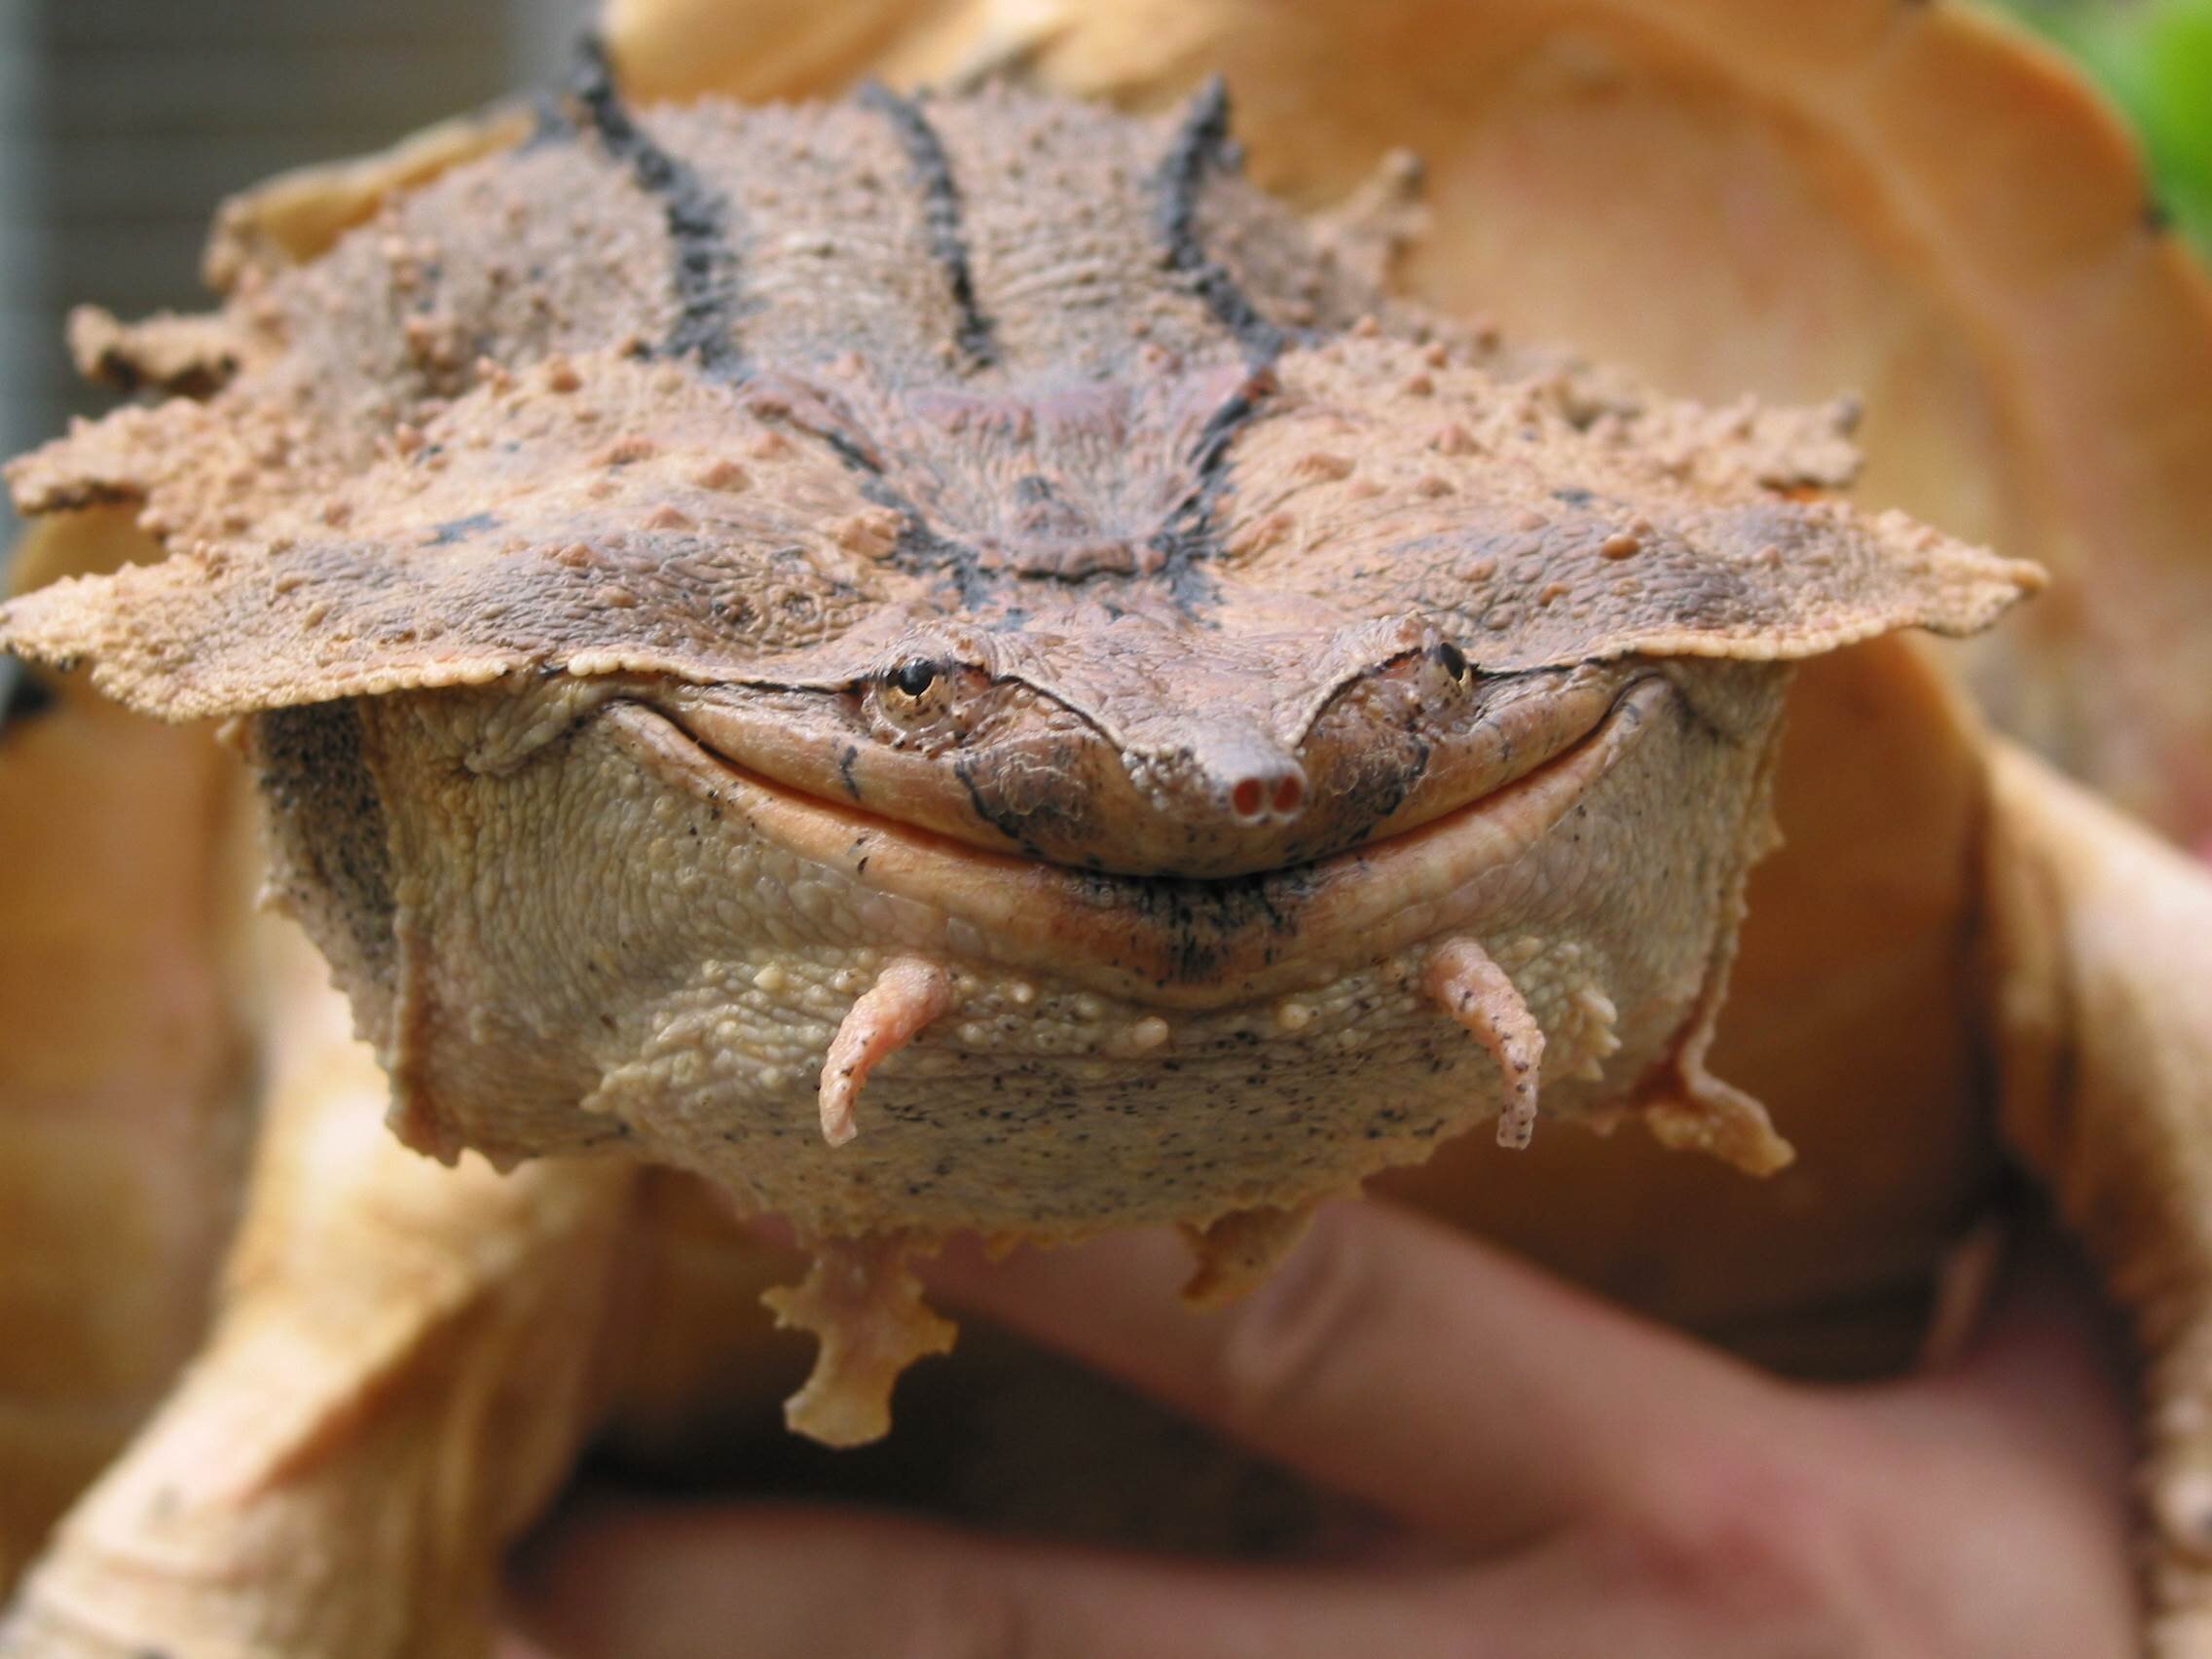 New species of turtle discovered